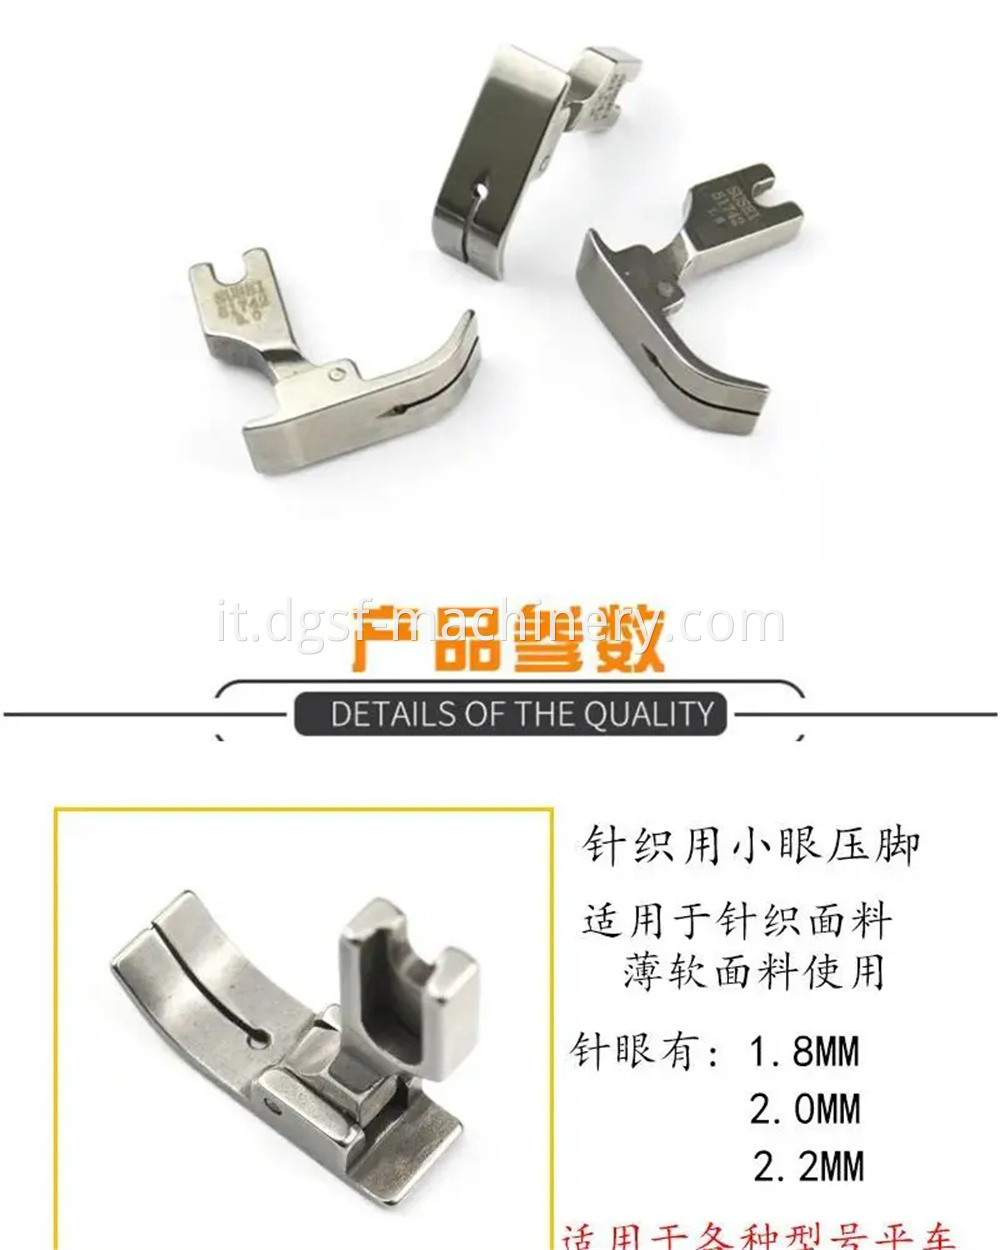 Special Presser Foot For Industrial Flat Knitting Thin Material 6 Jpg